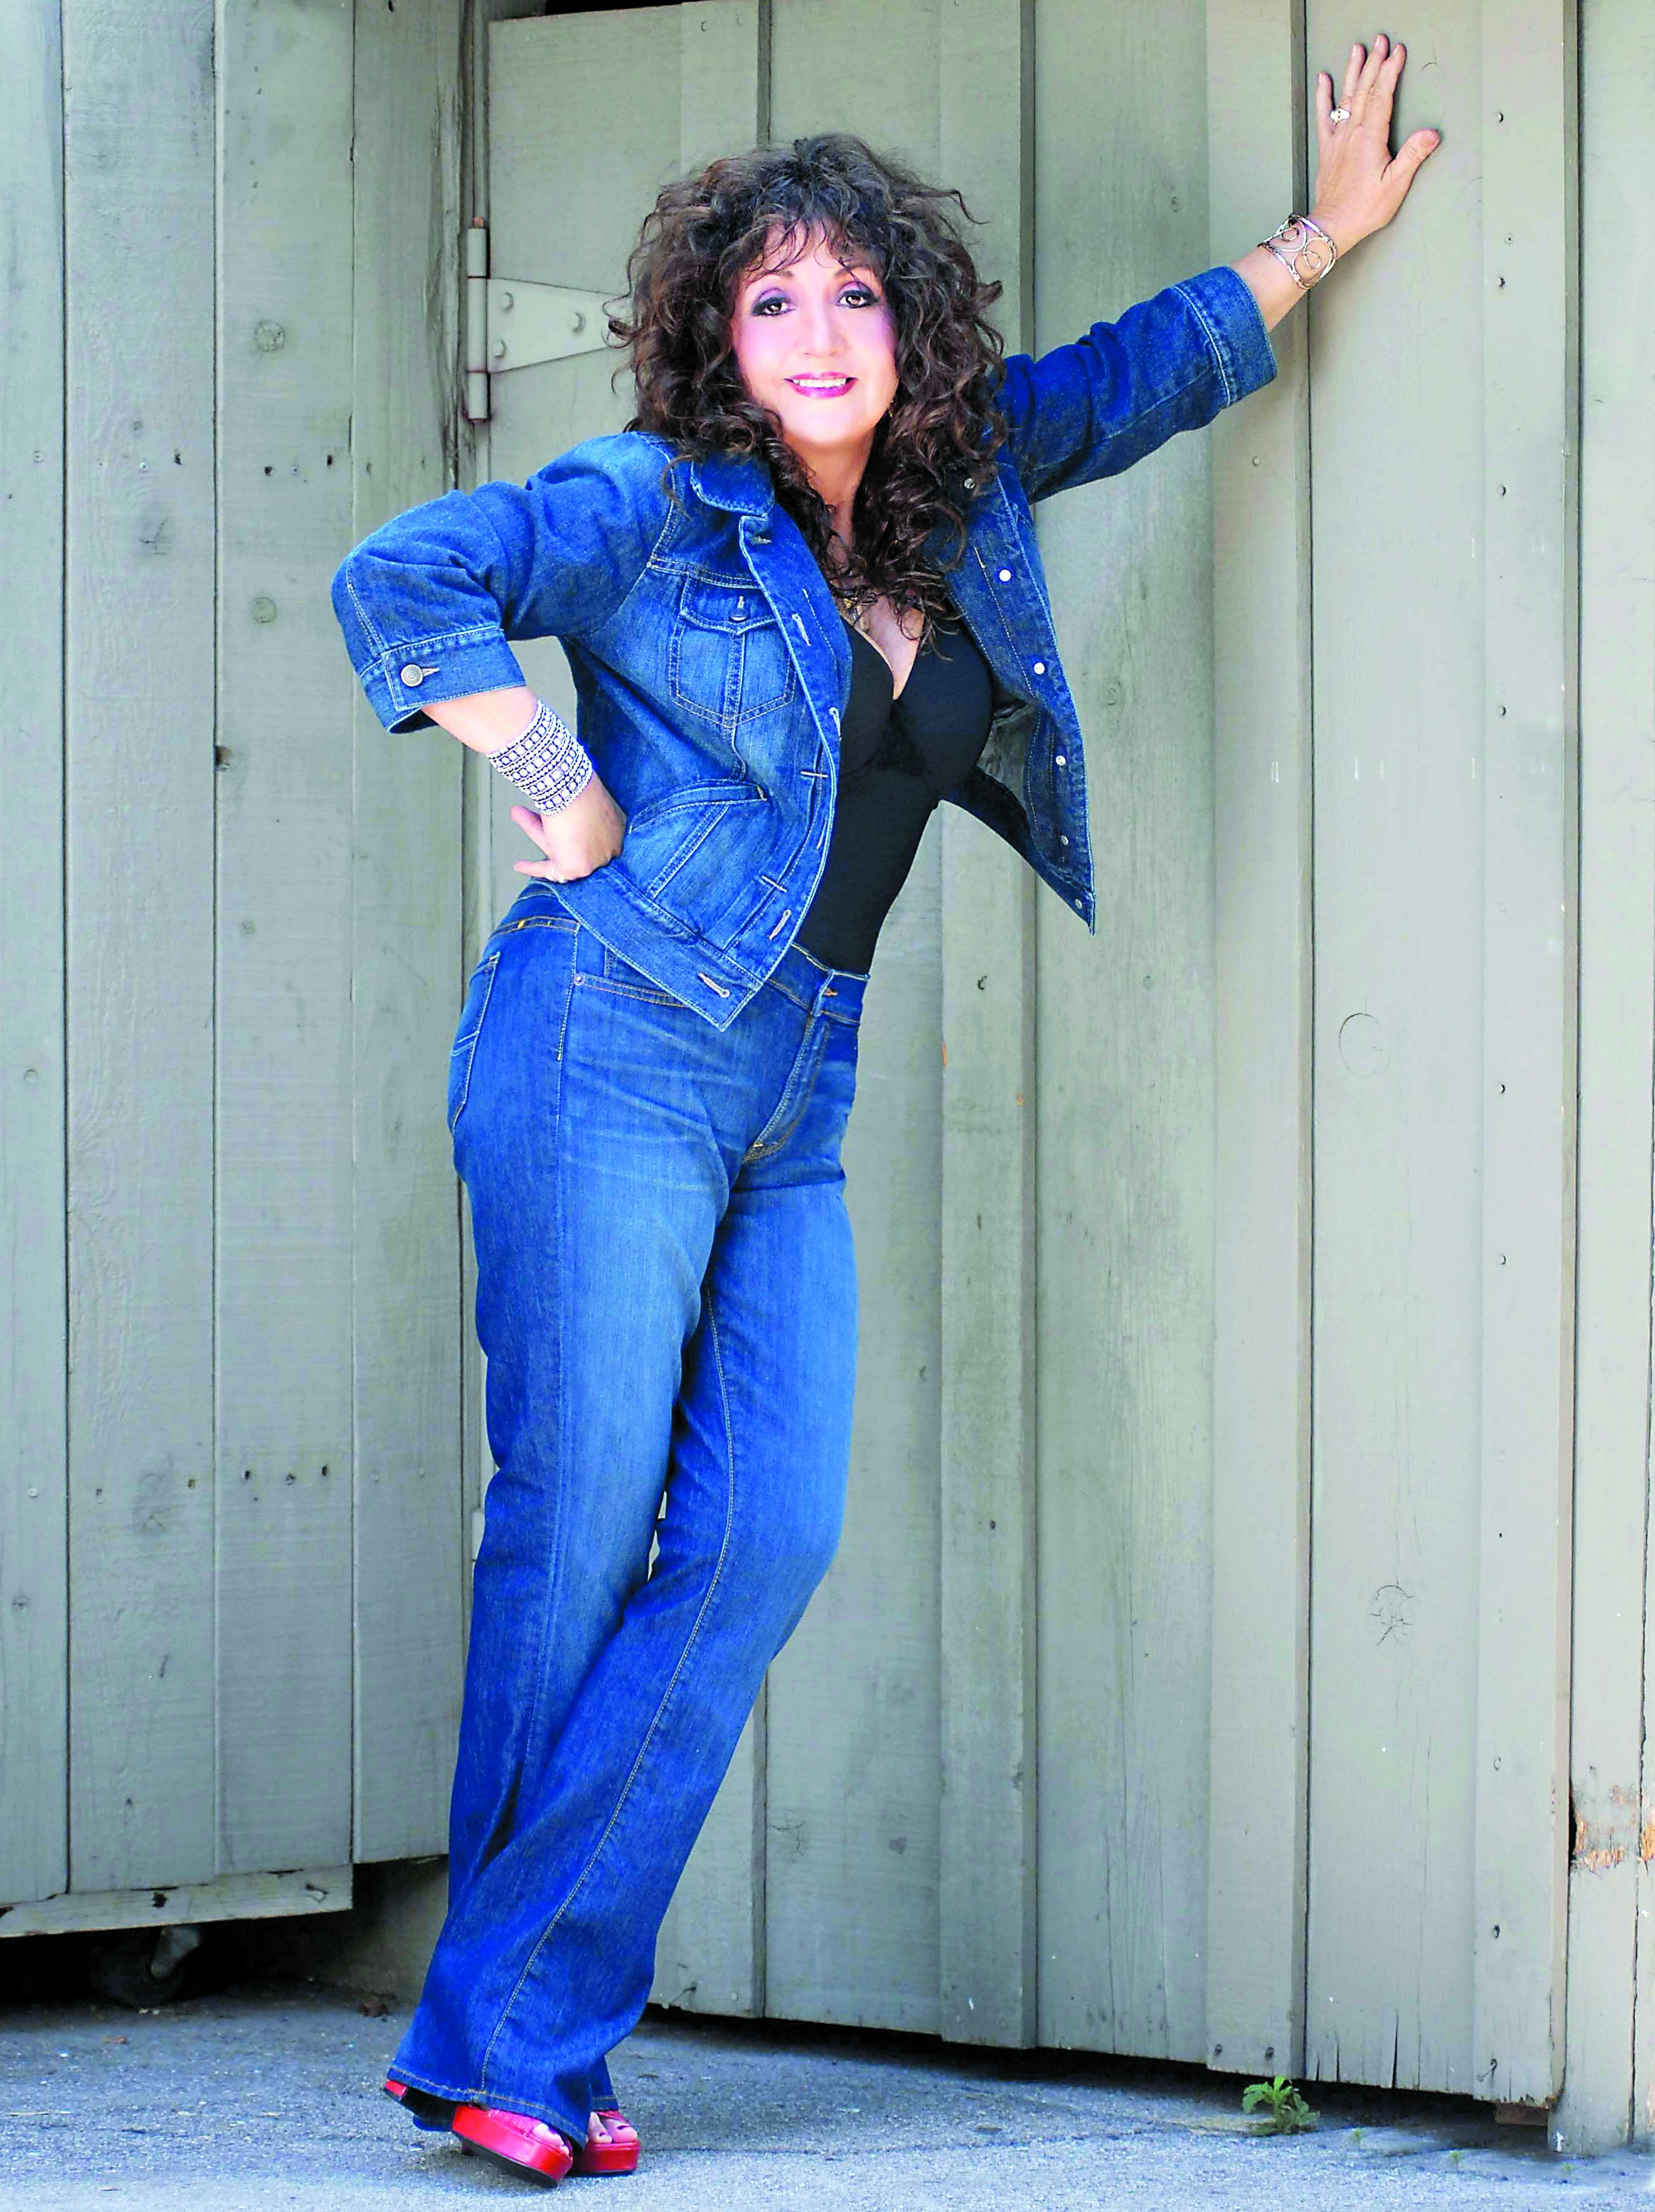 Songstress Muldaur brings high-spirited performance to The Upstage in PT